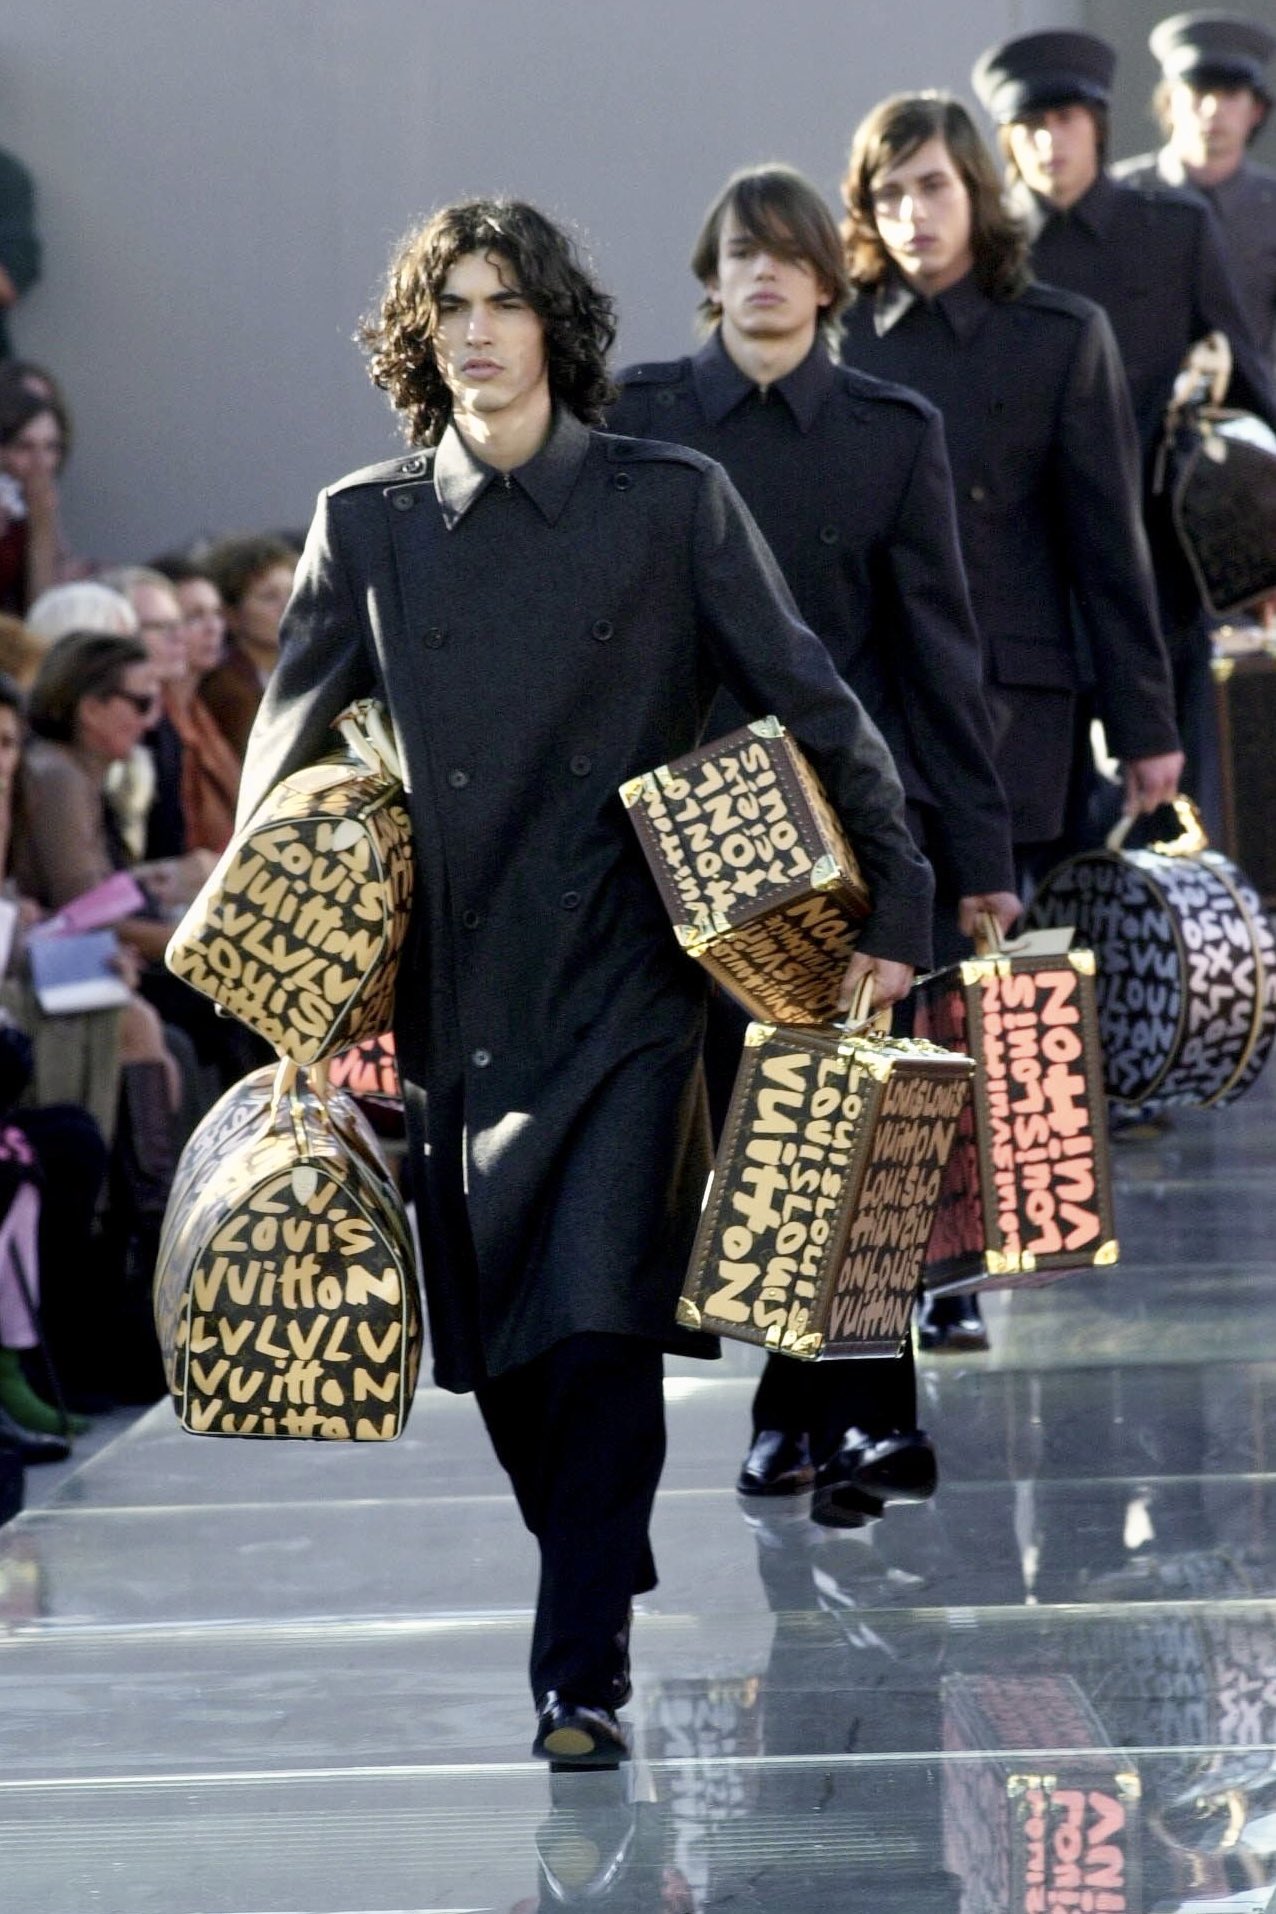 Nathan on X: louis vuitton 'graffiti by stephen sprouse' by marc